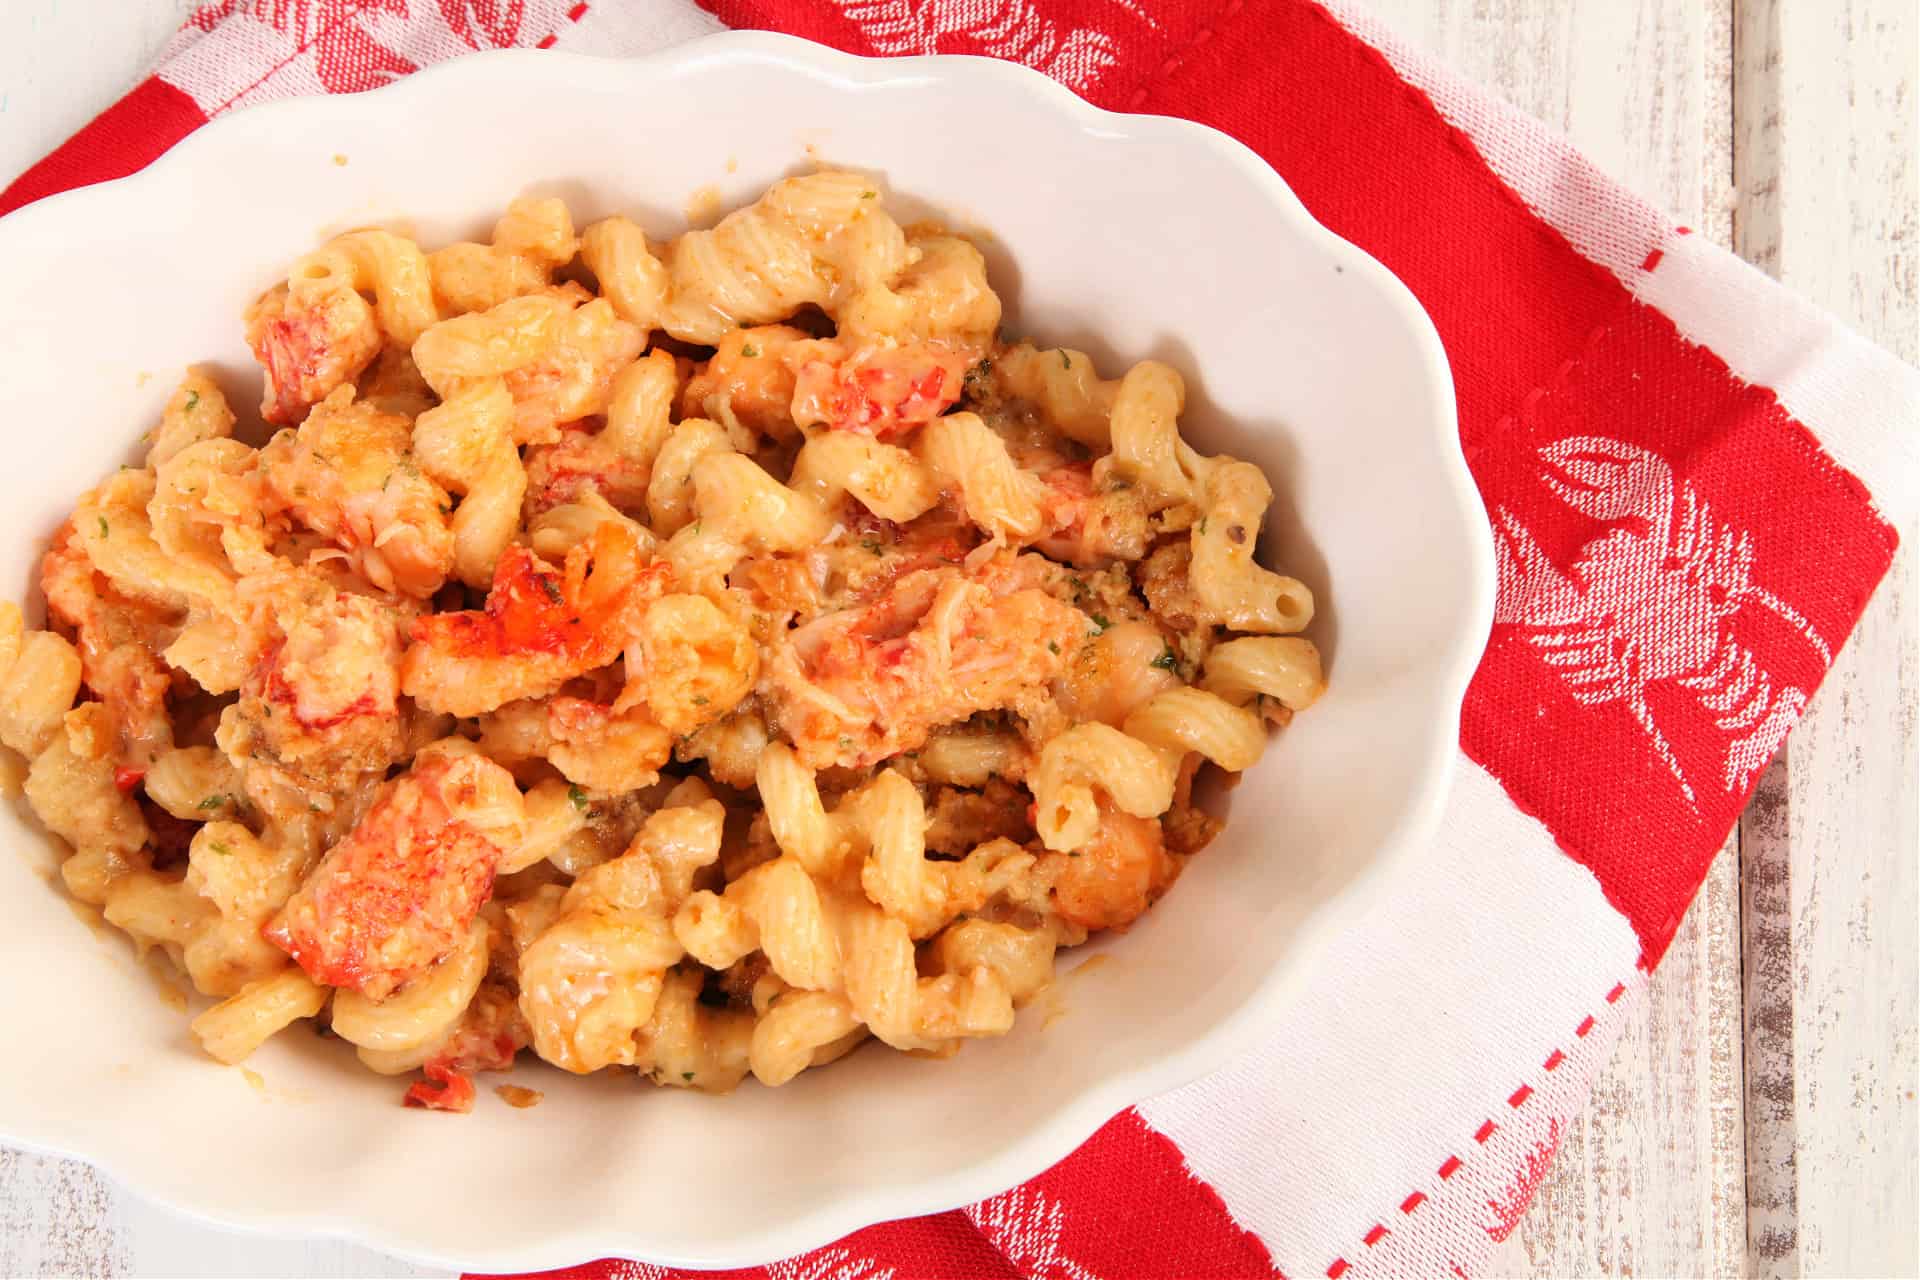 How to Make Lobster Macaroni and cheese